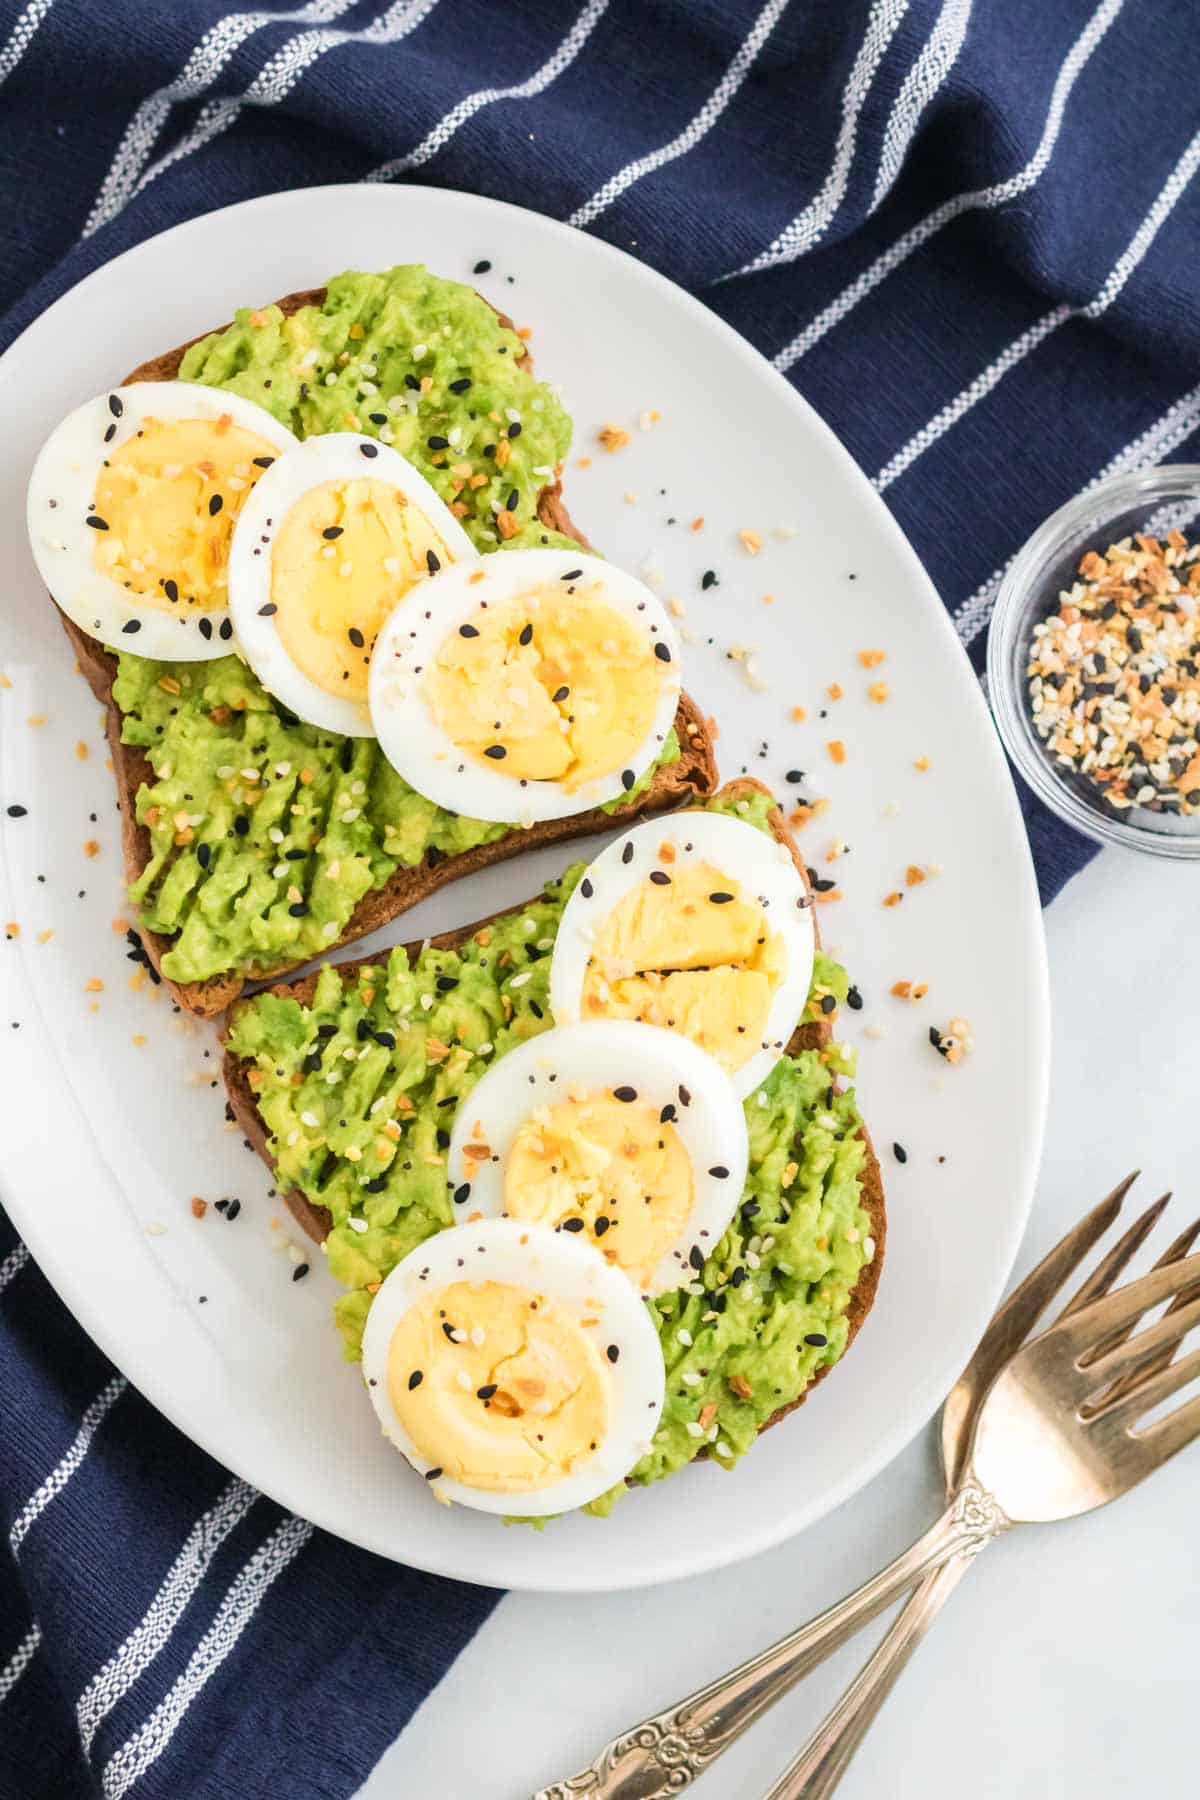 Two slices of gluten-free avocado toast topped with sliced hard boiled eggs on a white plate.